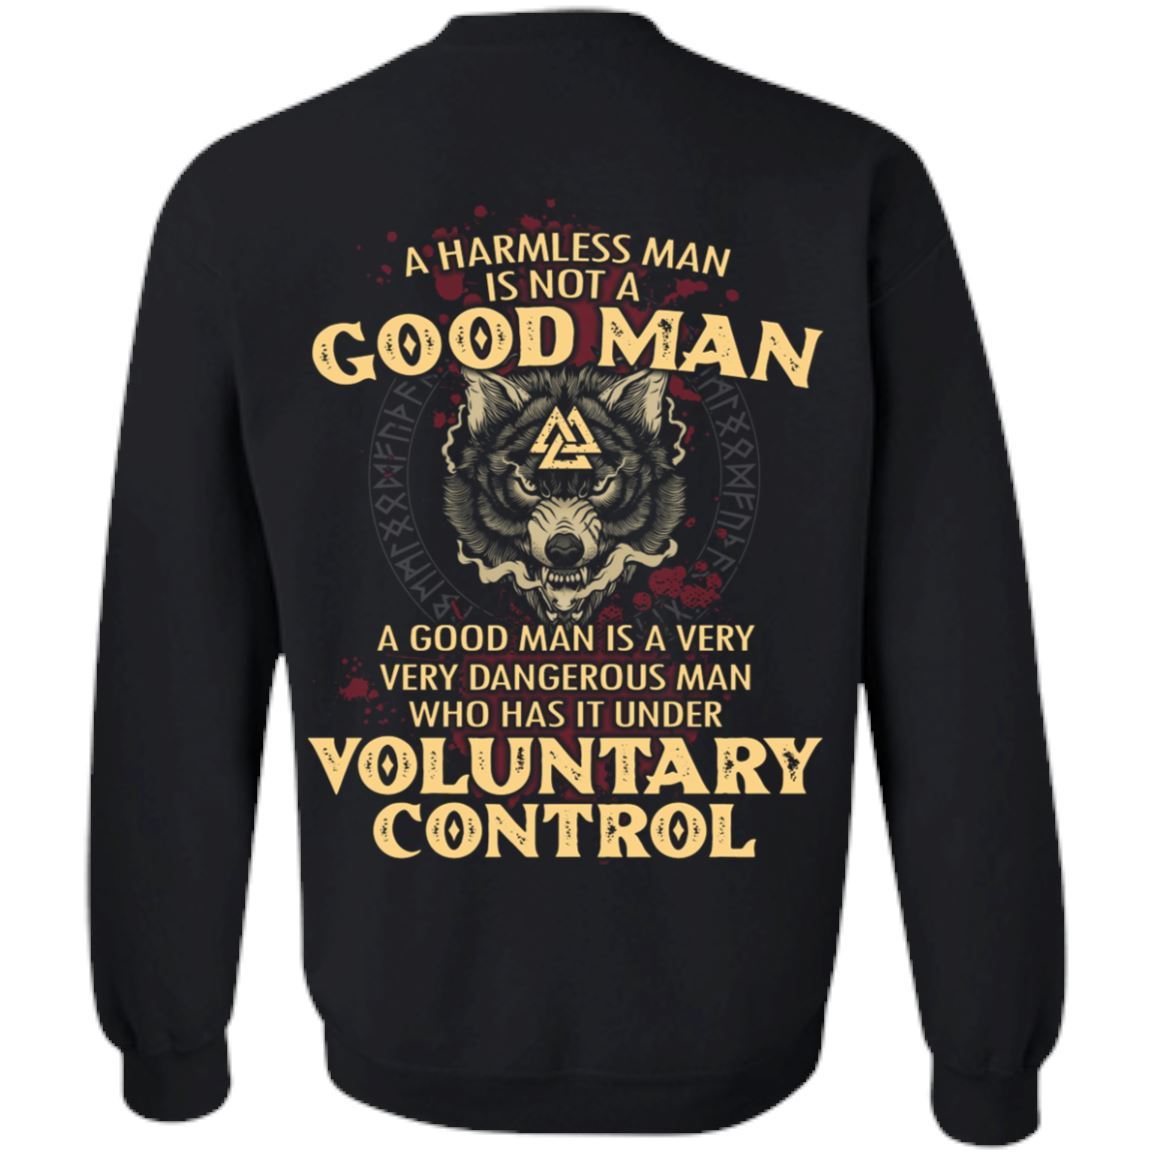 viking norse gym t shirt apparel a harmless man is not a good man backapparel heathen by nature authentic viking products unisex crewneck pullover sweatshirtblacks 978109 1024x1024@2x